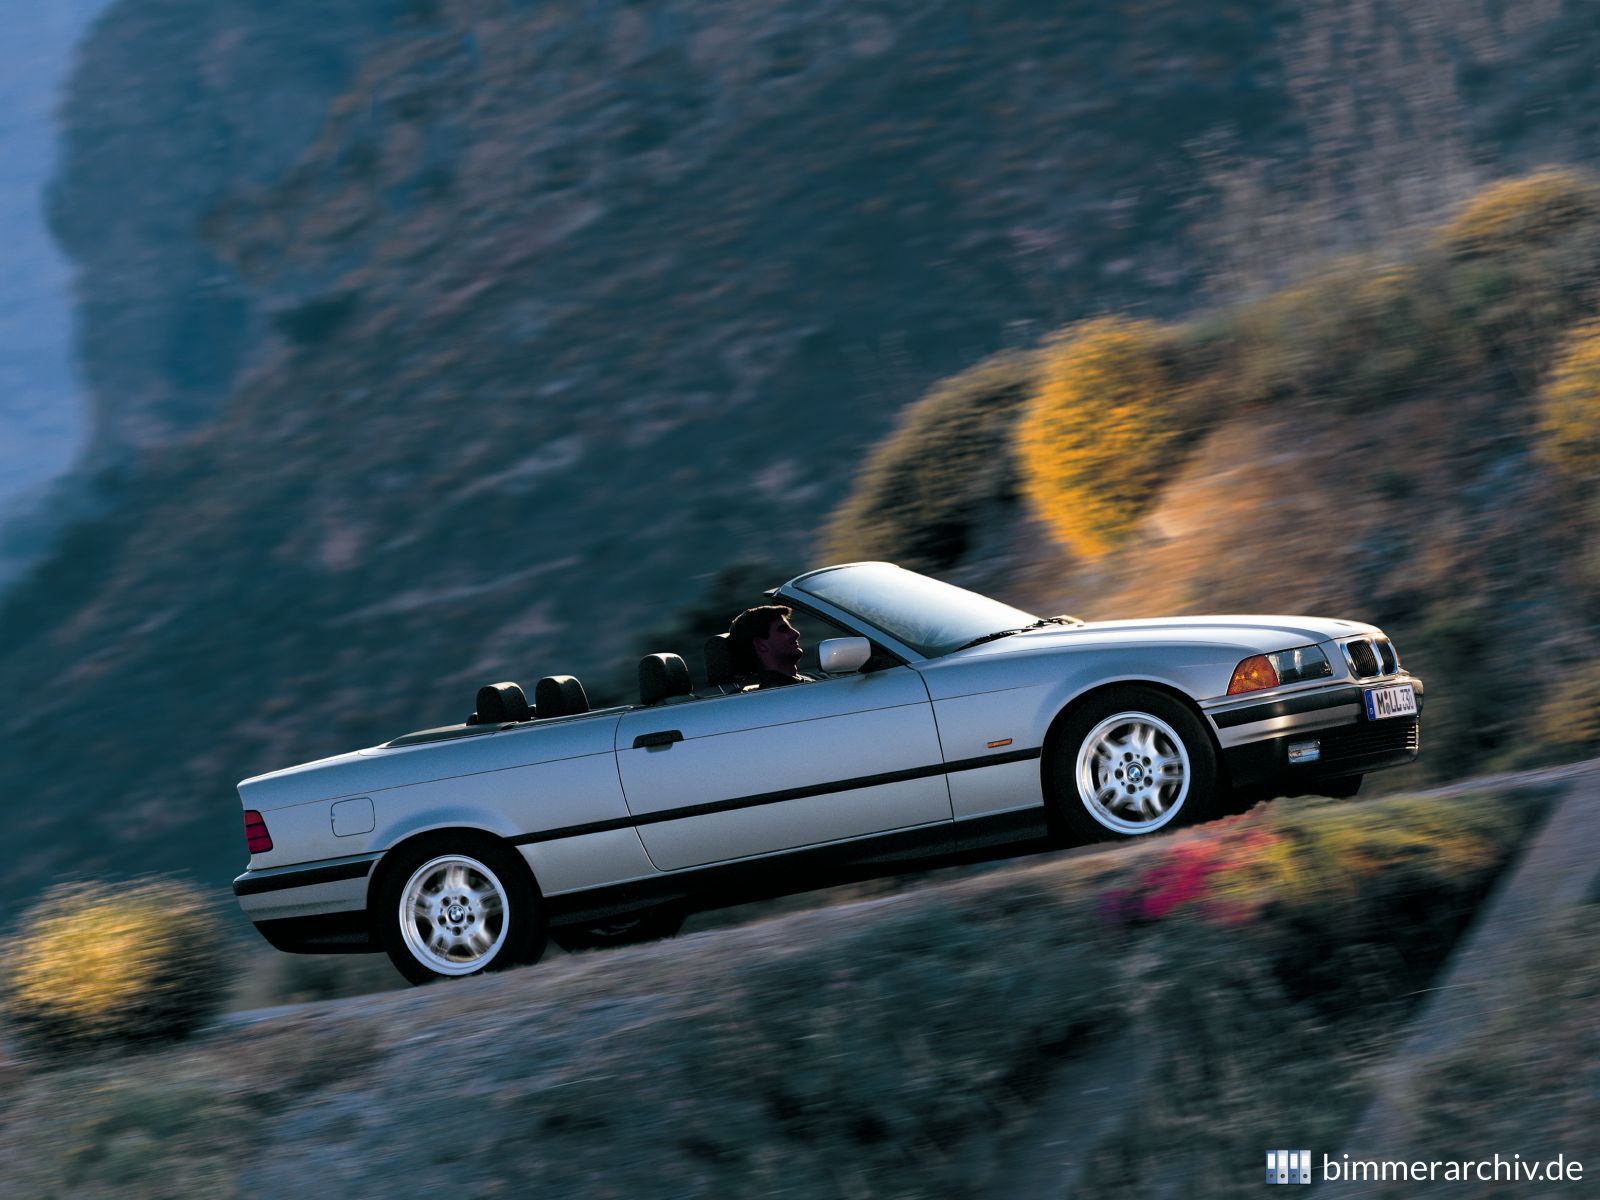 Model Archive for BMW models · BMW 318i Cabrio · bmwarchive.org